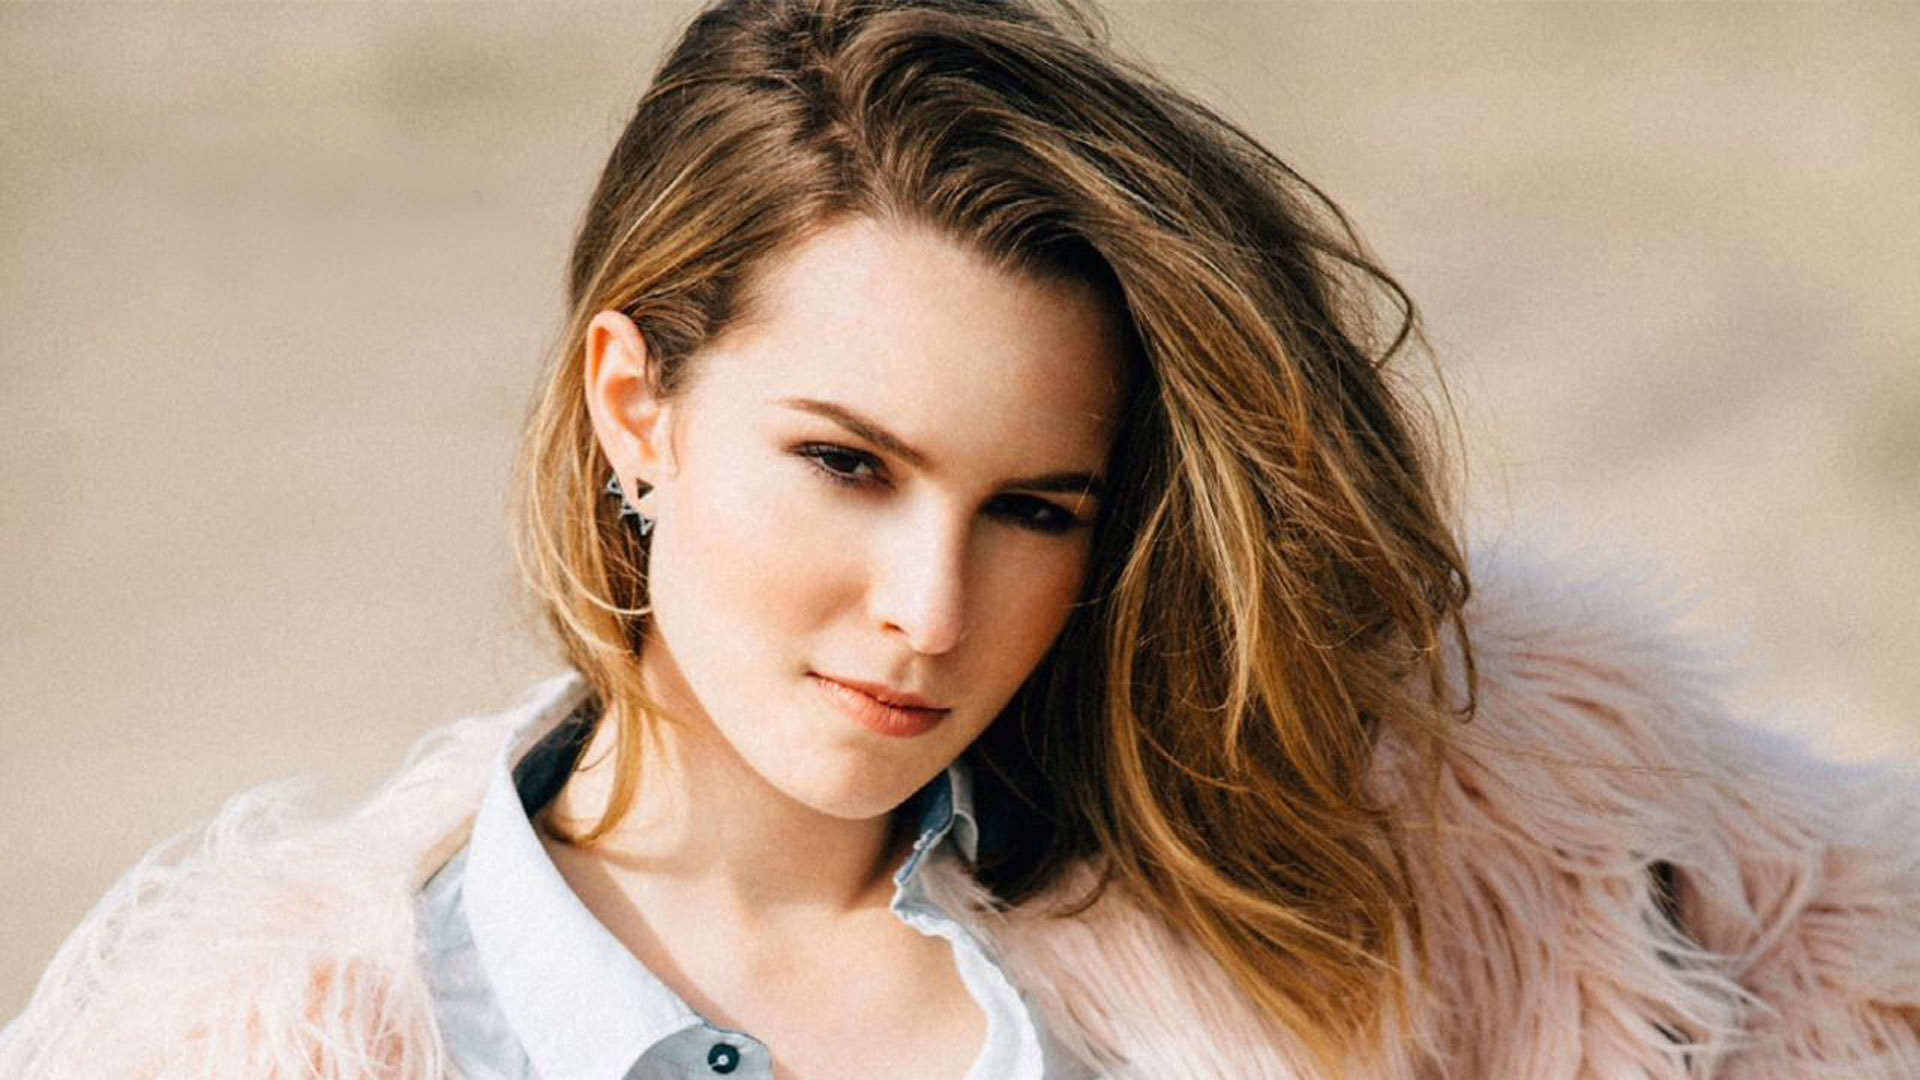 Bridgit Mendler Wallpapers Images Photos Pictures Backgrounds